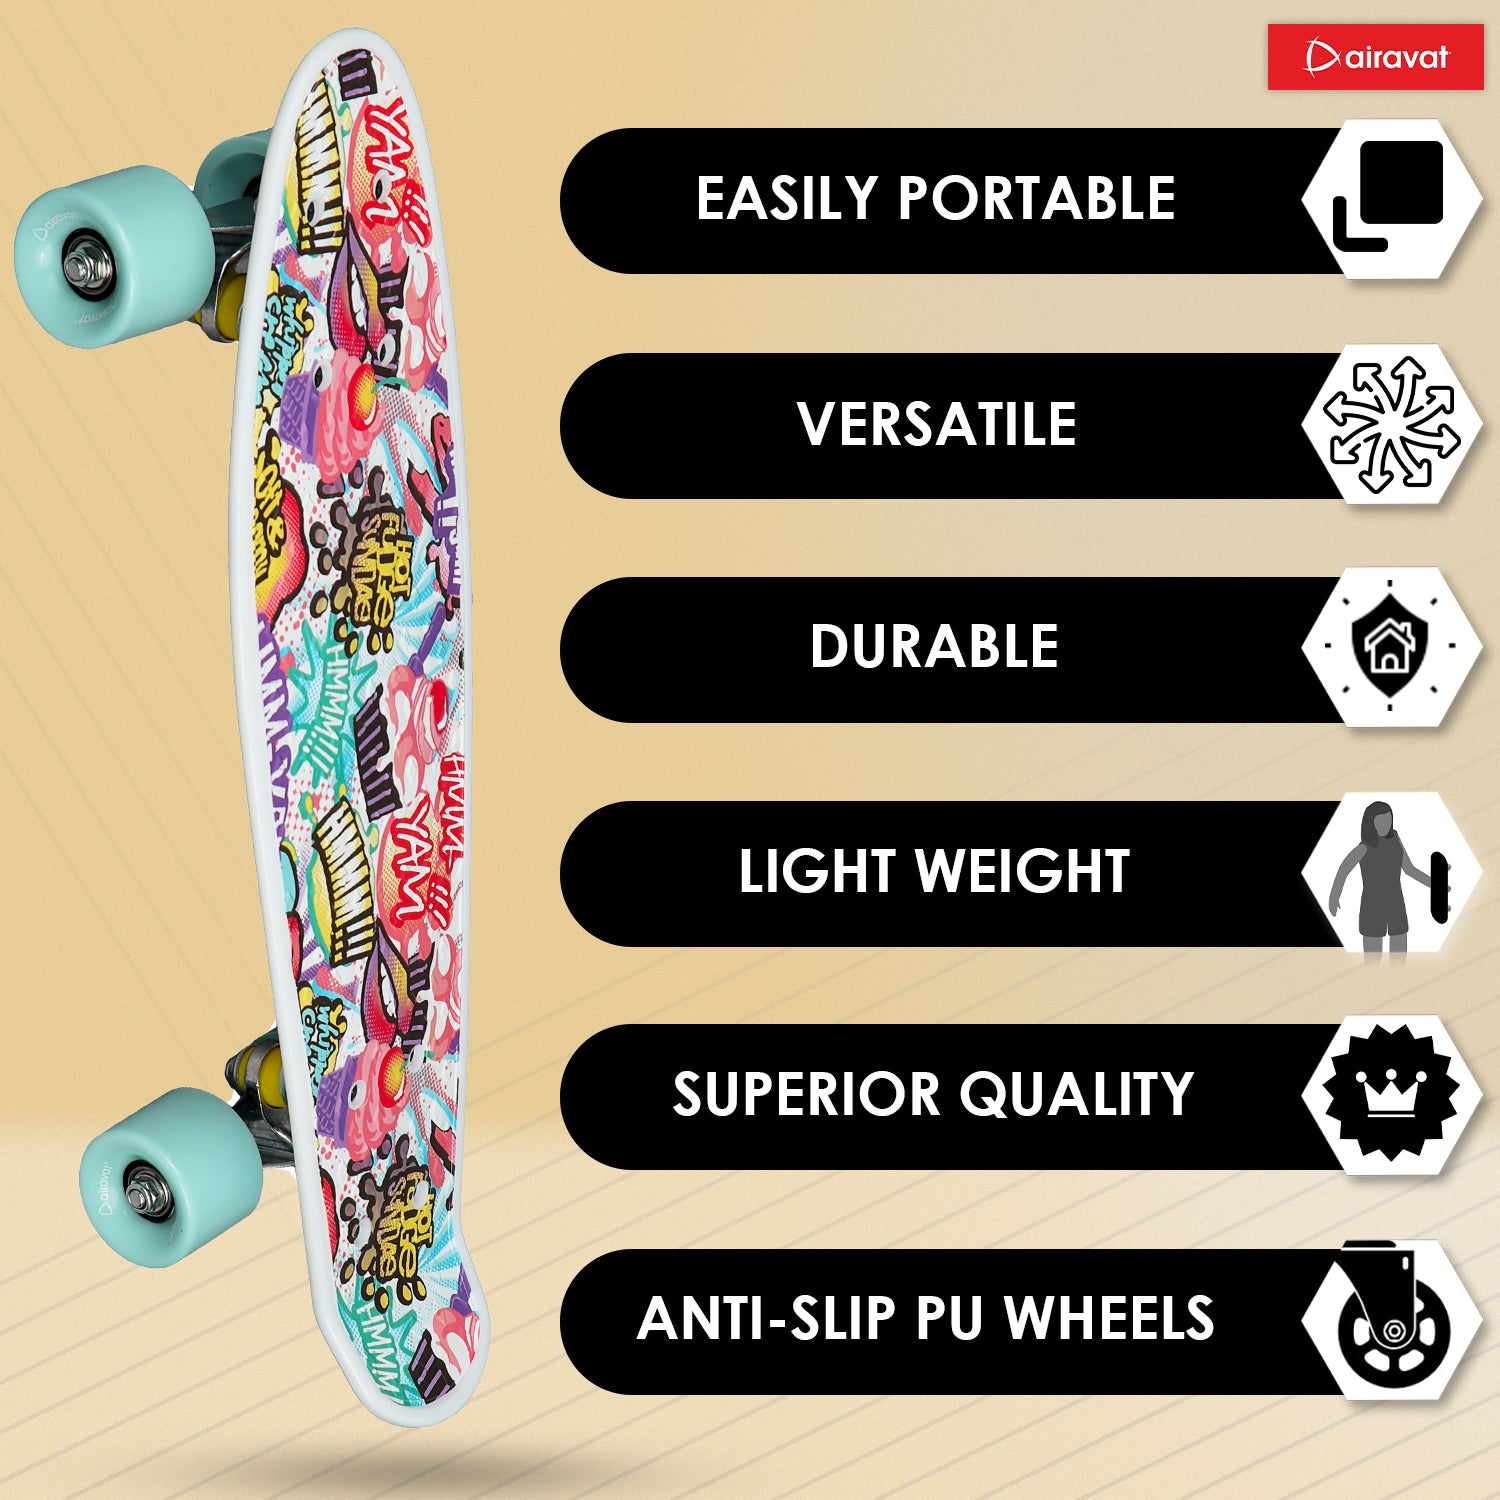 7811-skateboard-style-6-more-features